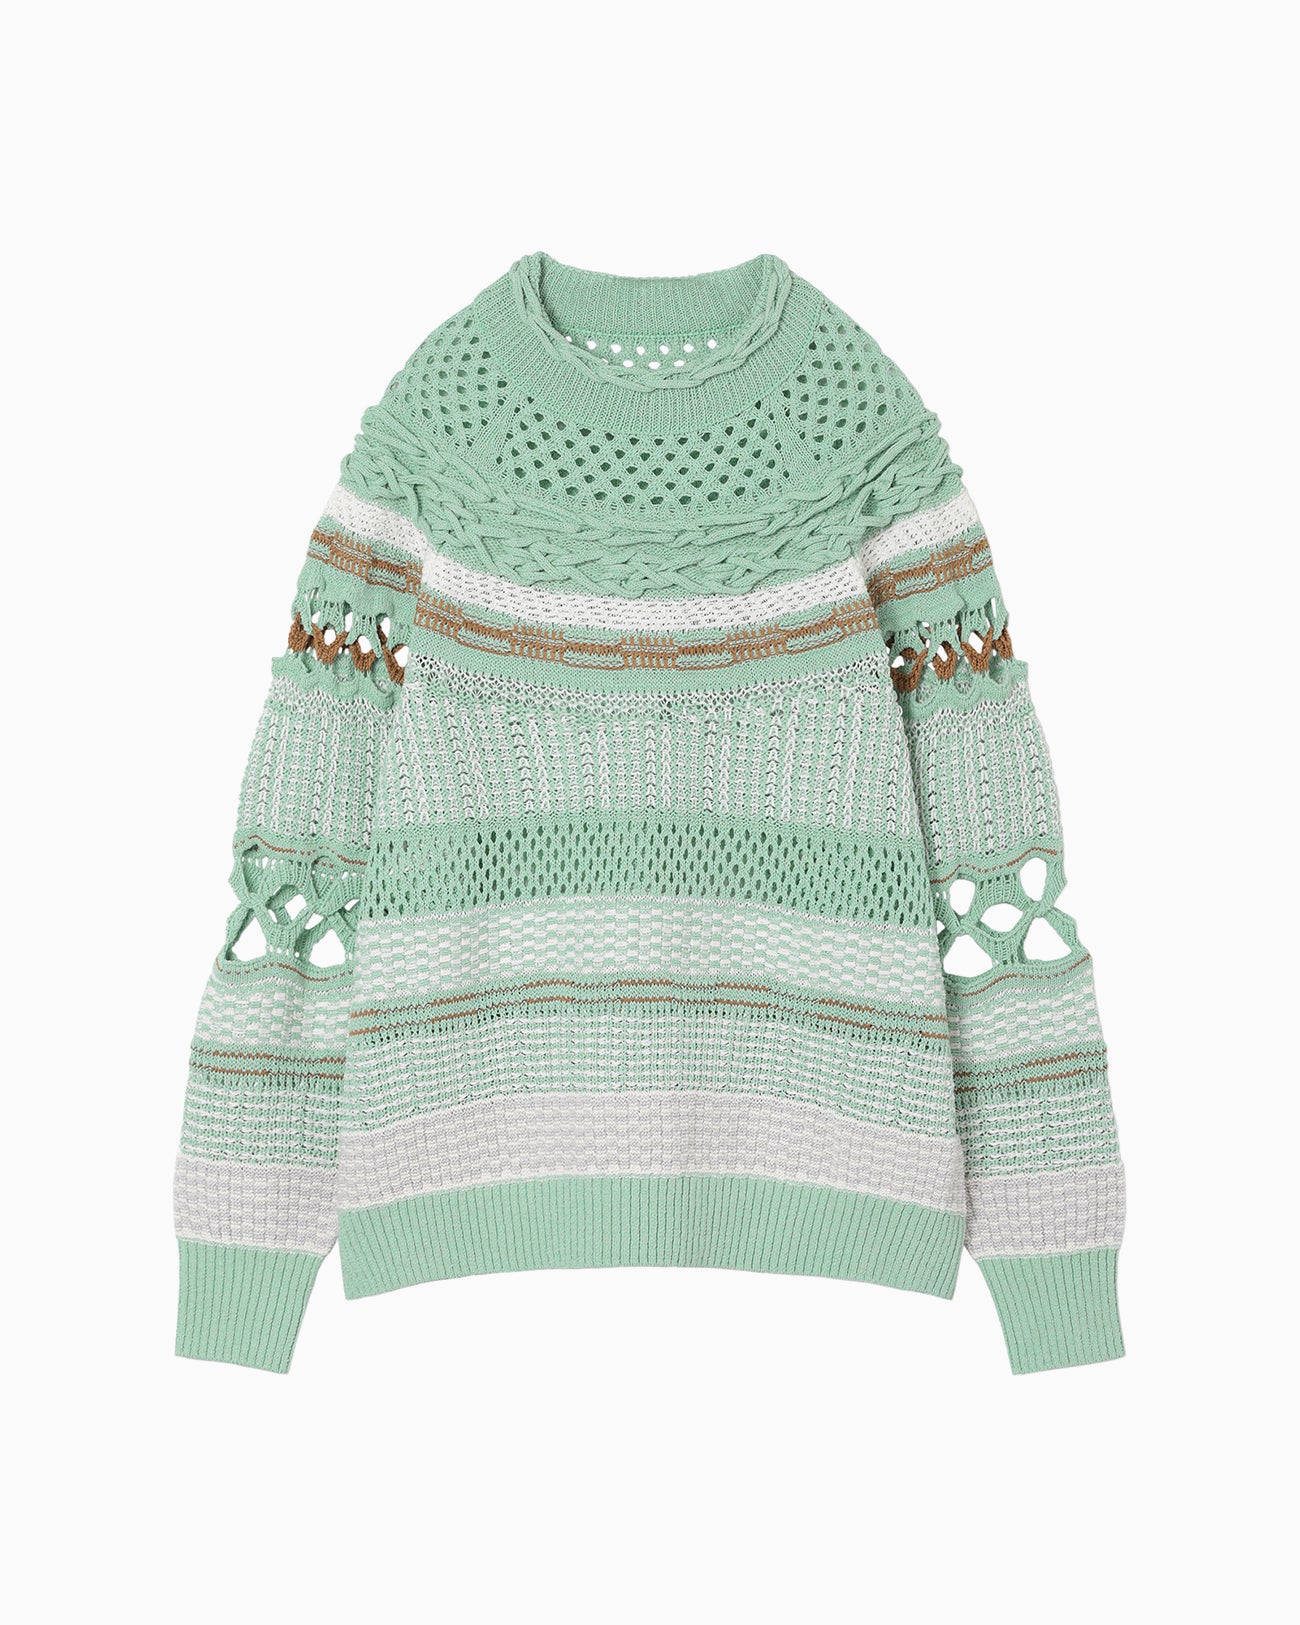 Bamboo Basket Pattern Knitted Top - mint green